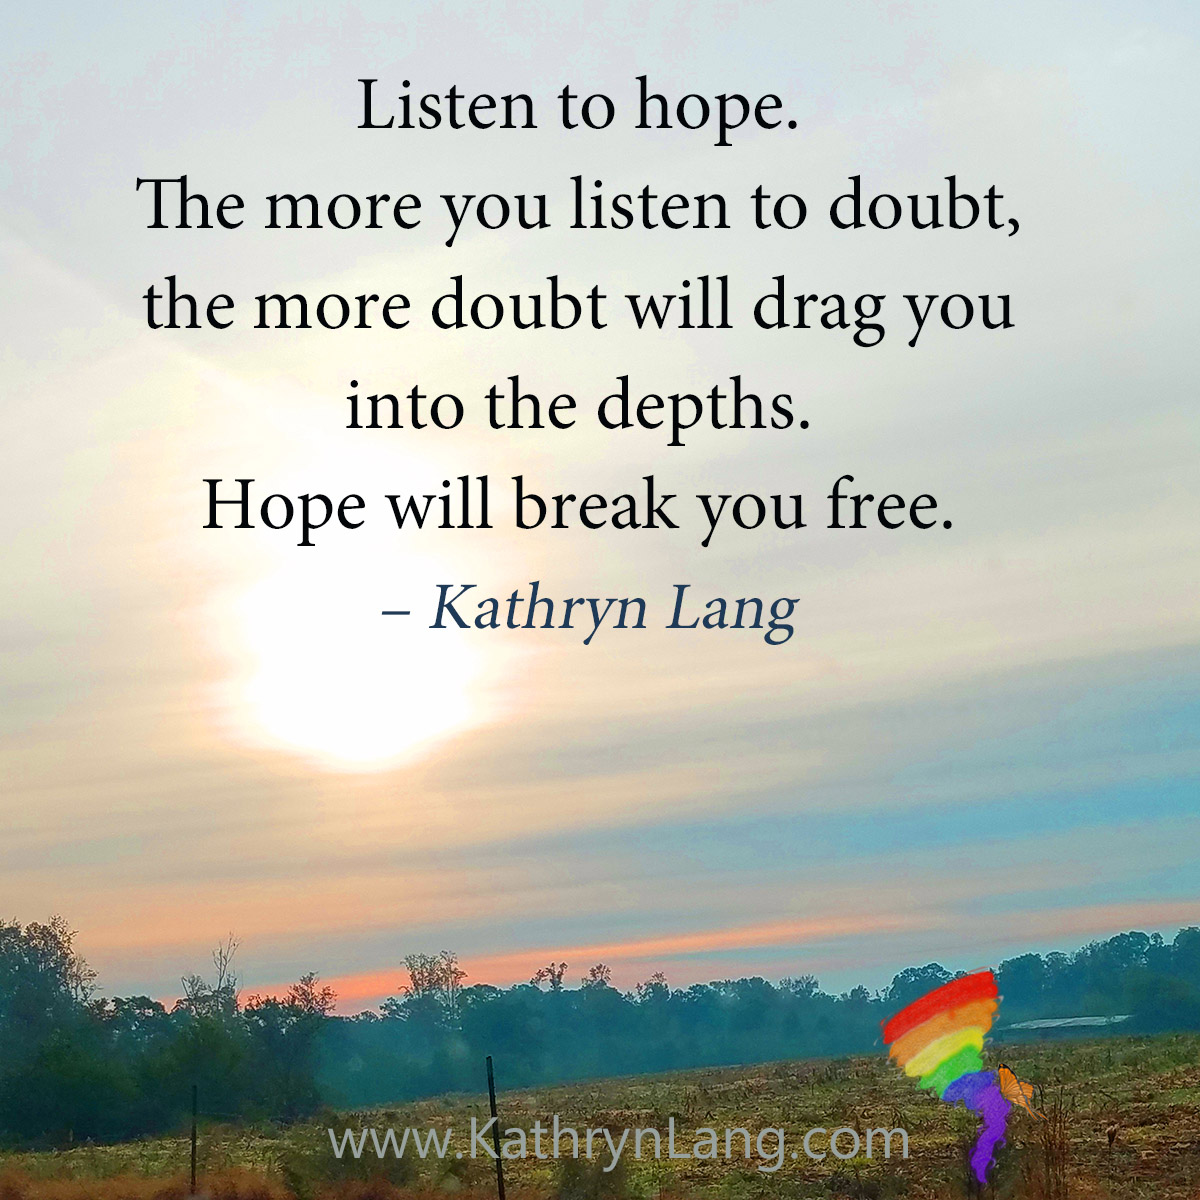 #QuoteoftheDay

Listen to hope. 
The more you listen to doubt, 
the more it will drag you 
into the depths. 
Hope will break you free.
- Kathryn Lang